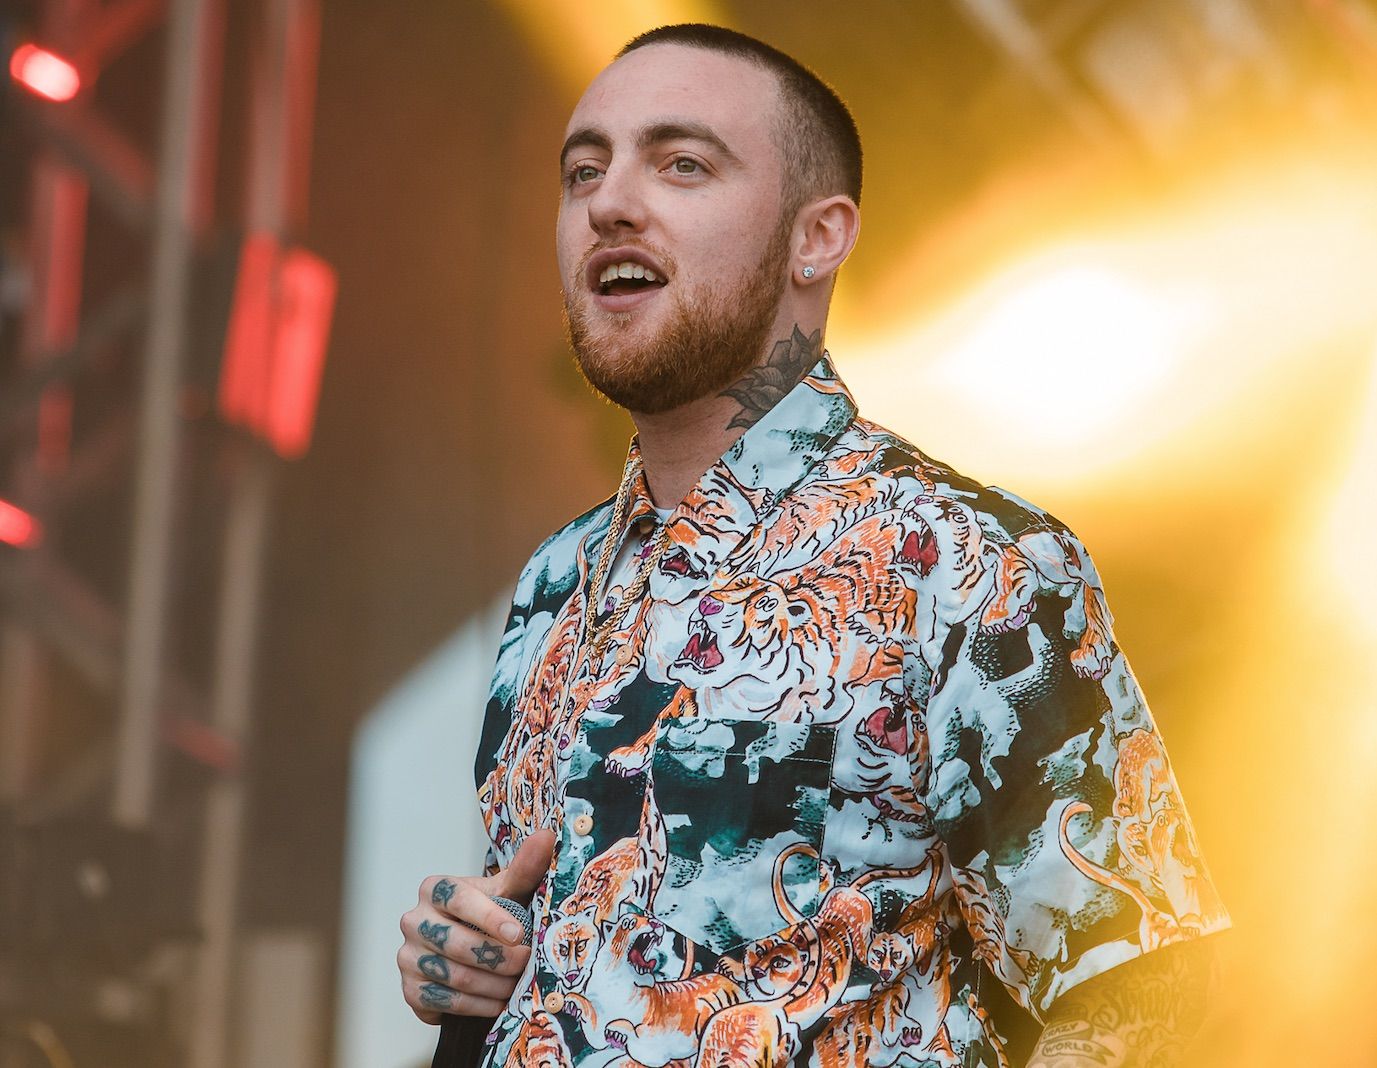 Rapper Mac Miller death leads to arrest nearly one year later